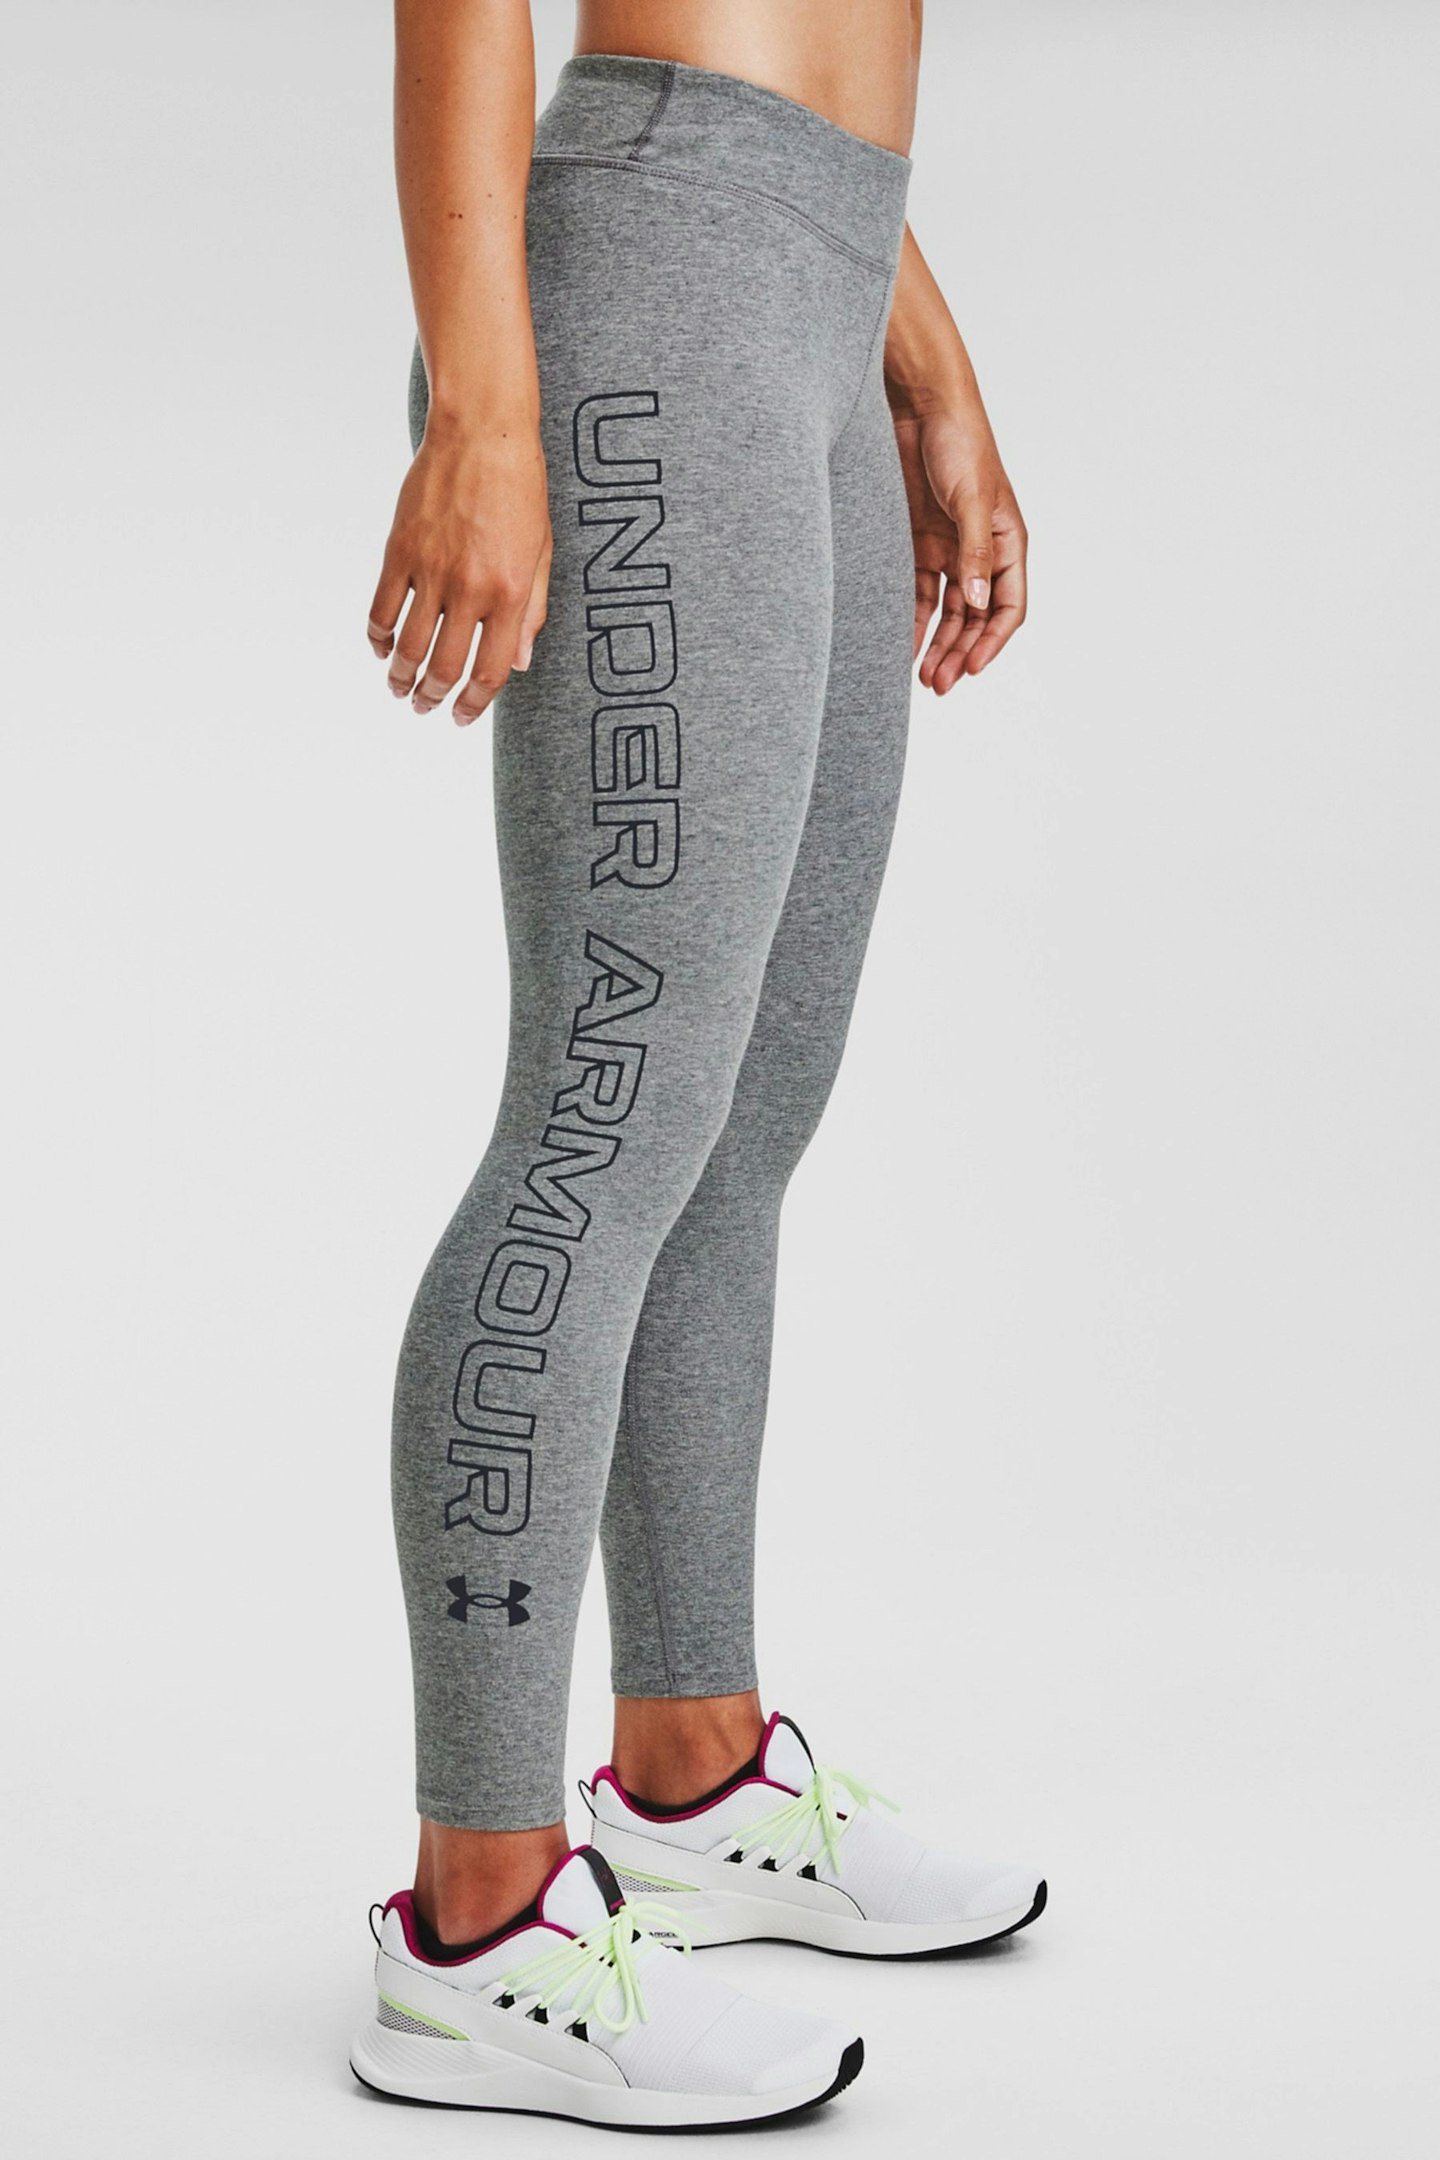 best workout leggings women Under Armour, Under Armour High Waisted Favourite Leggings, £12